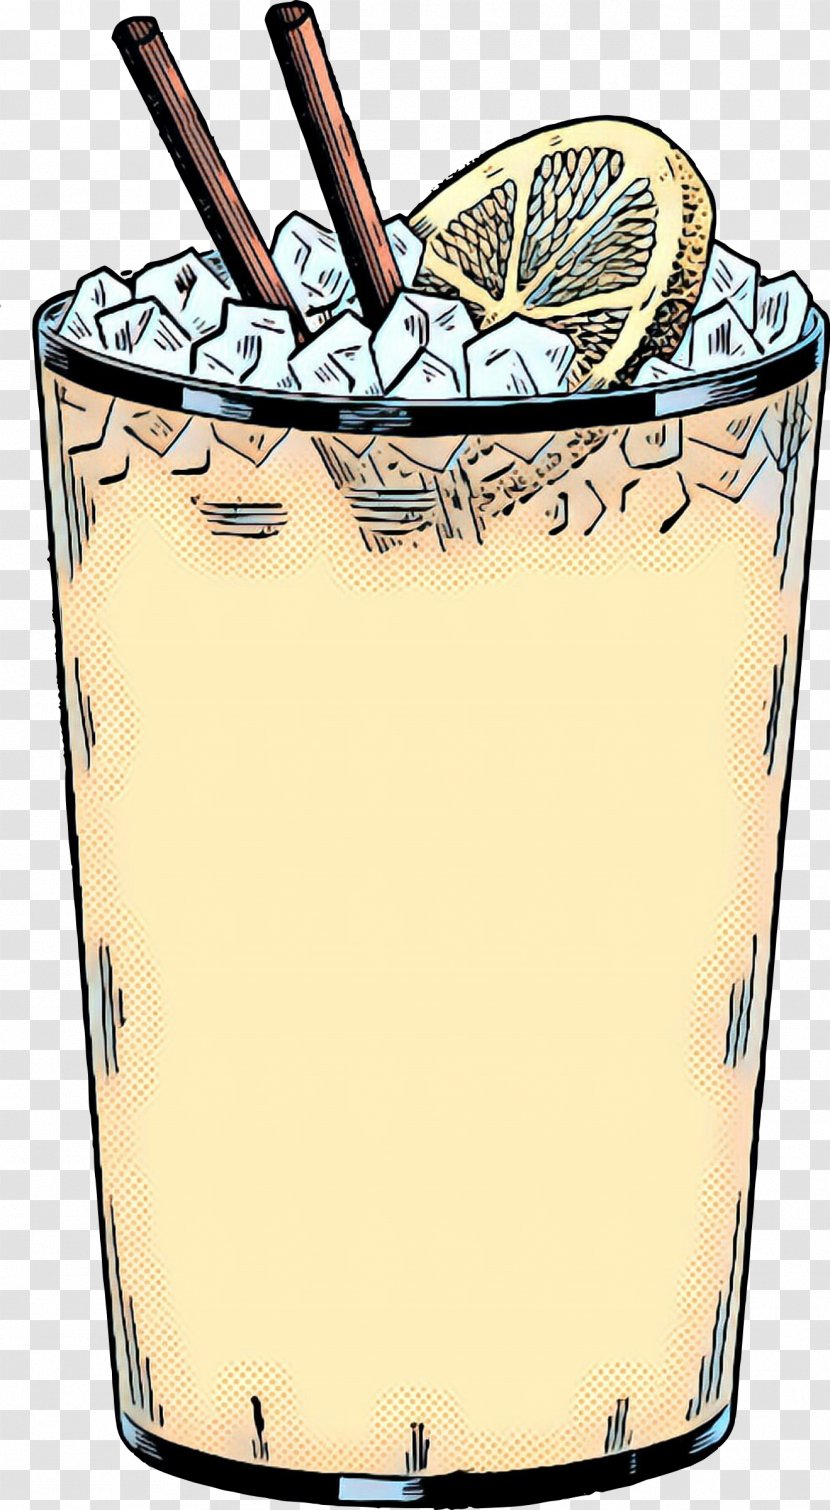 Book Drawing - Iced Tea - Cocktail Garnish Nonalcoholic Beverage Transparent PNG